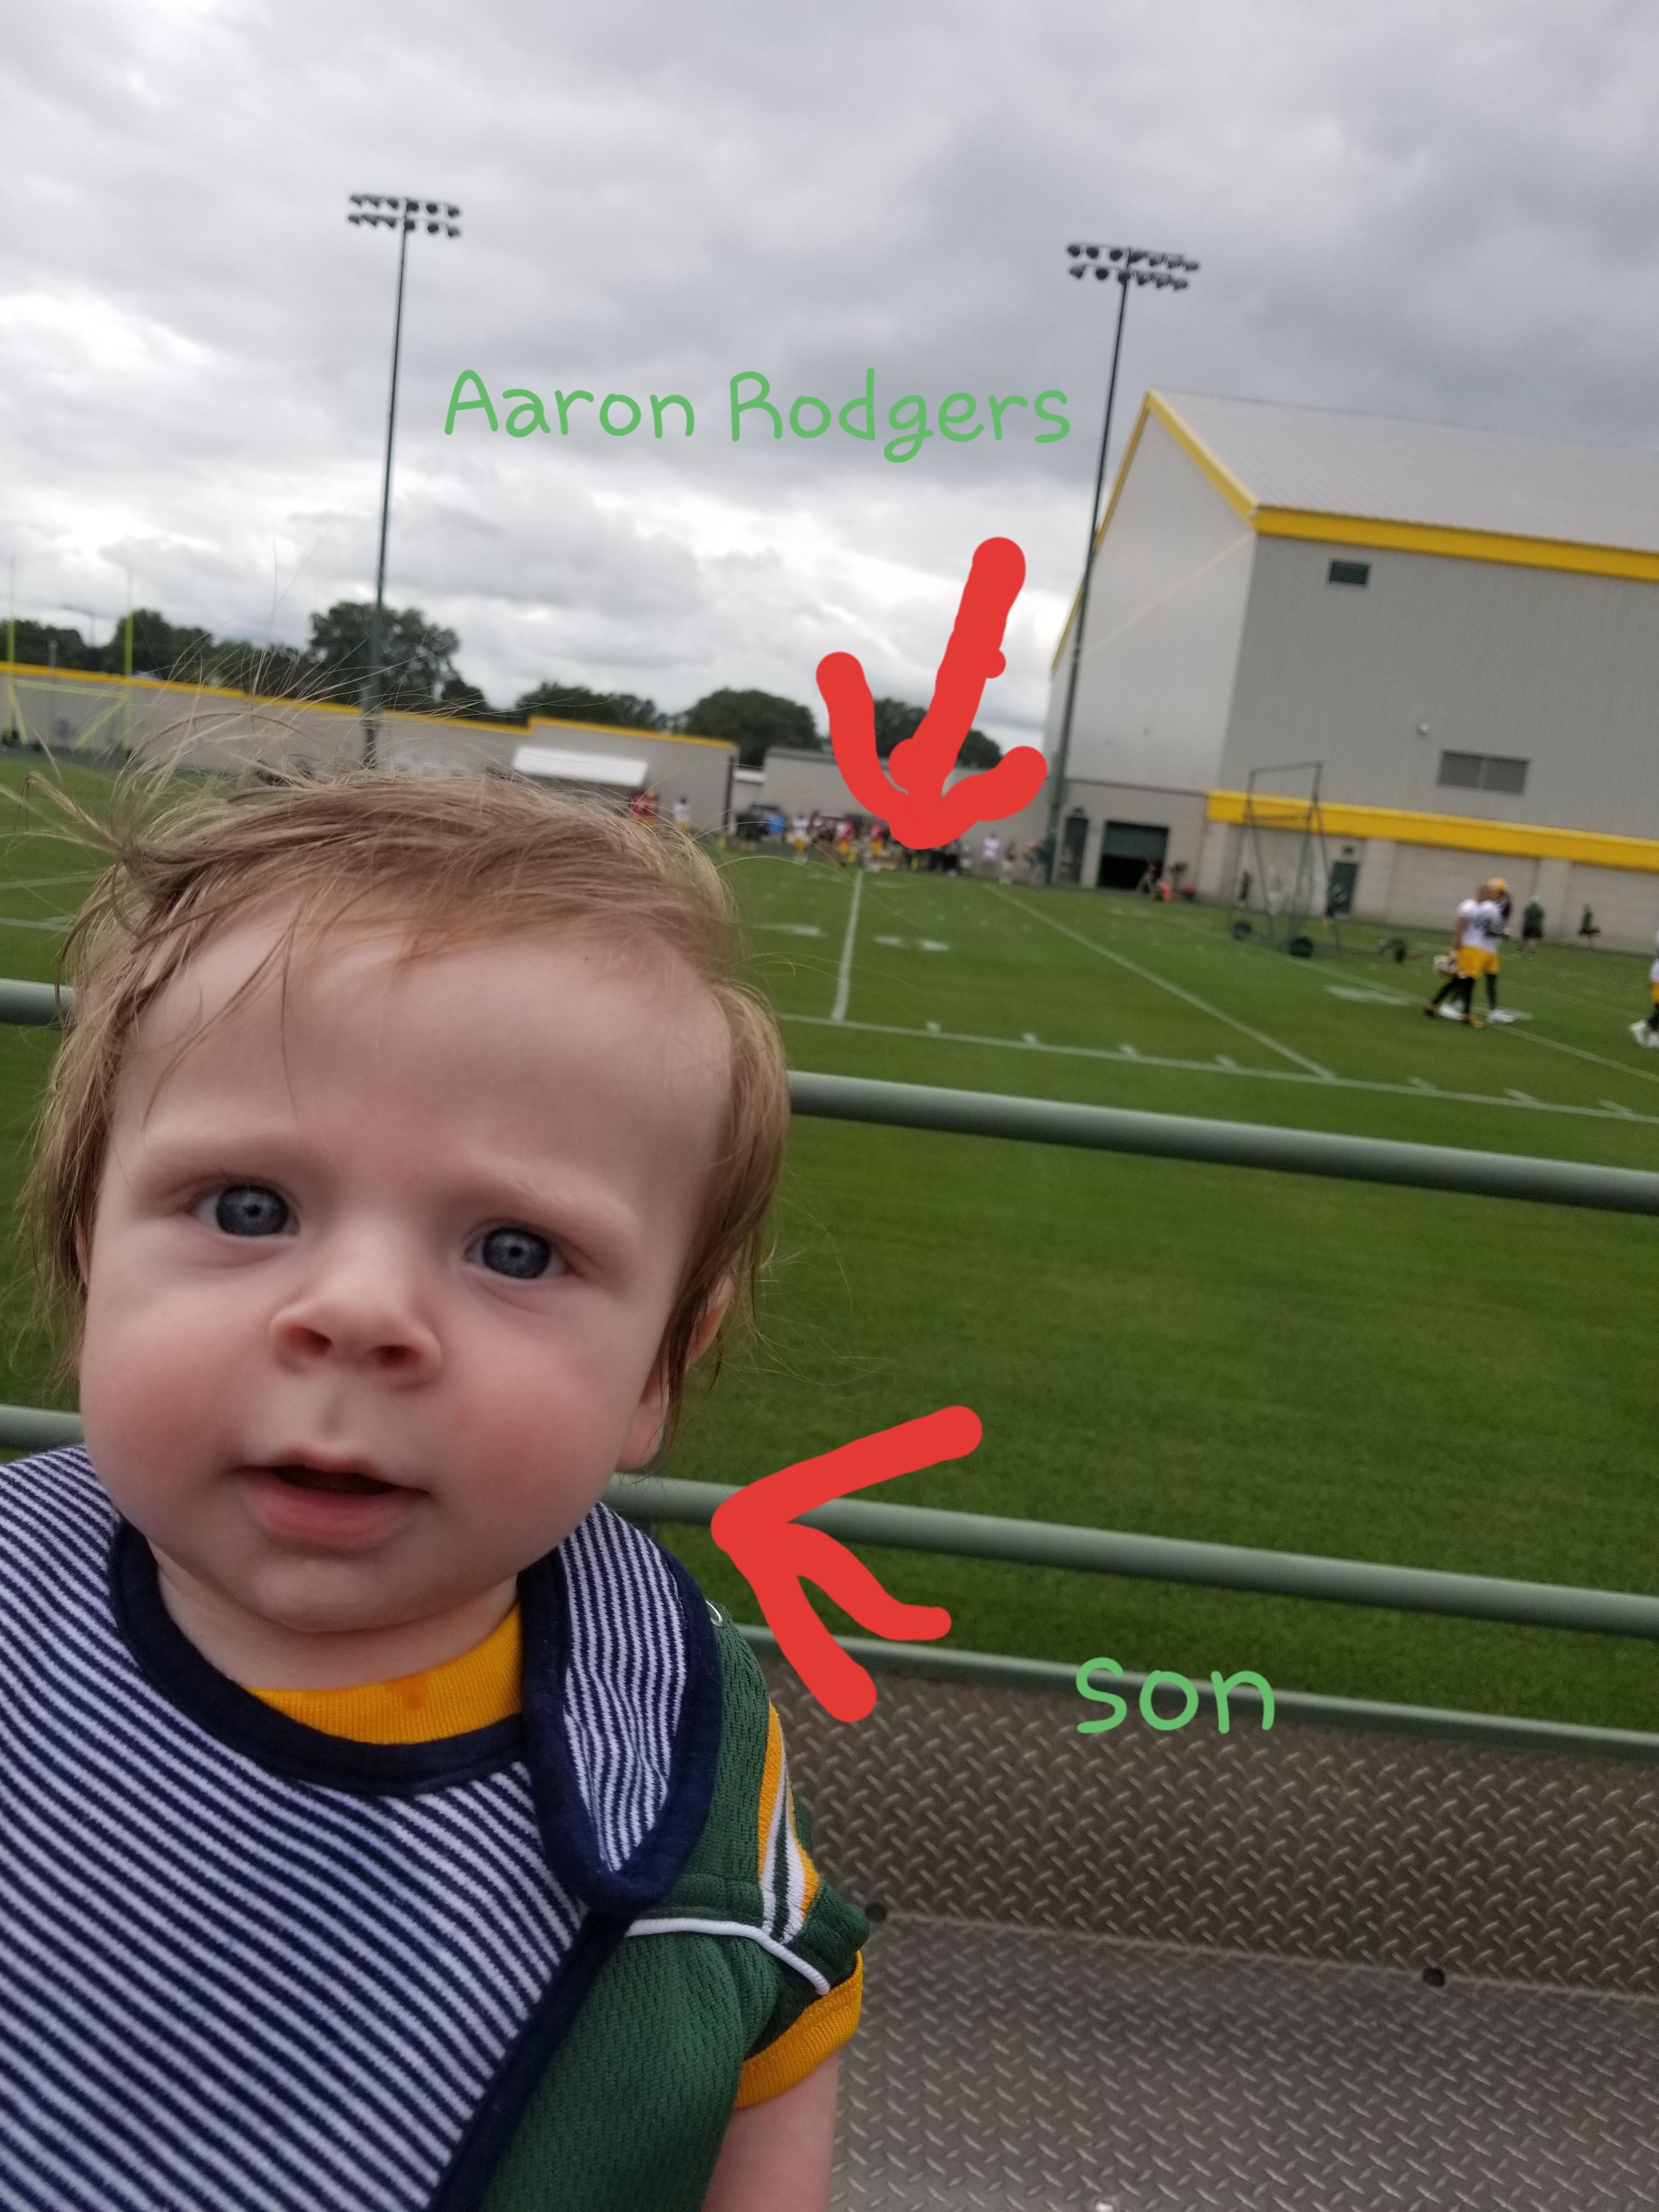 My son got his picture taken with Aaron Rodgers today!